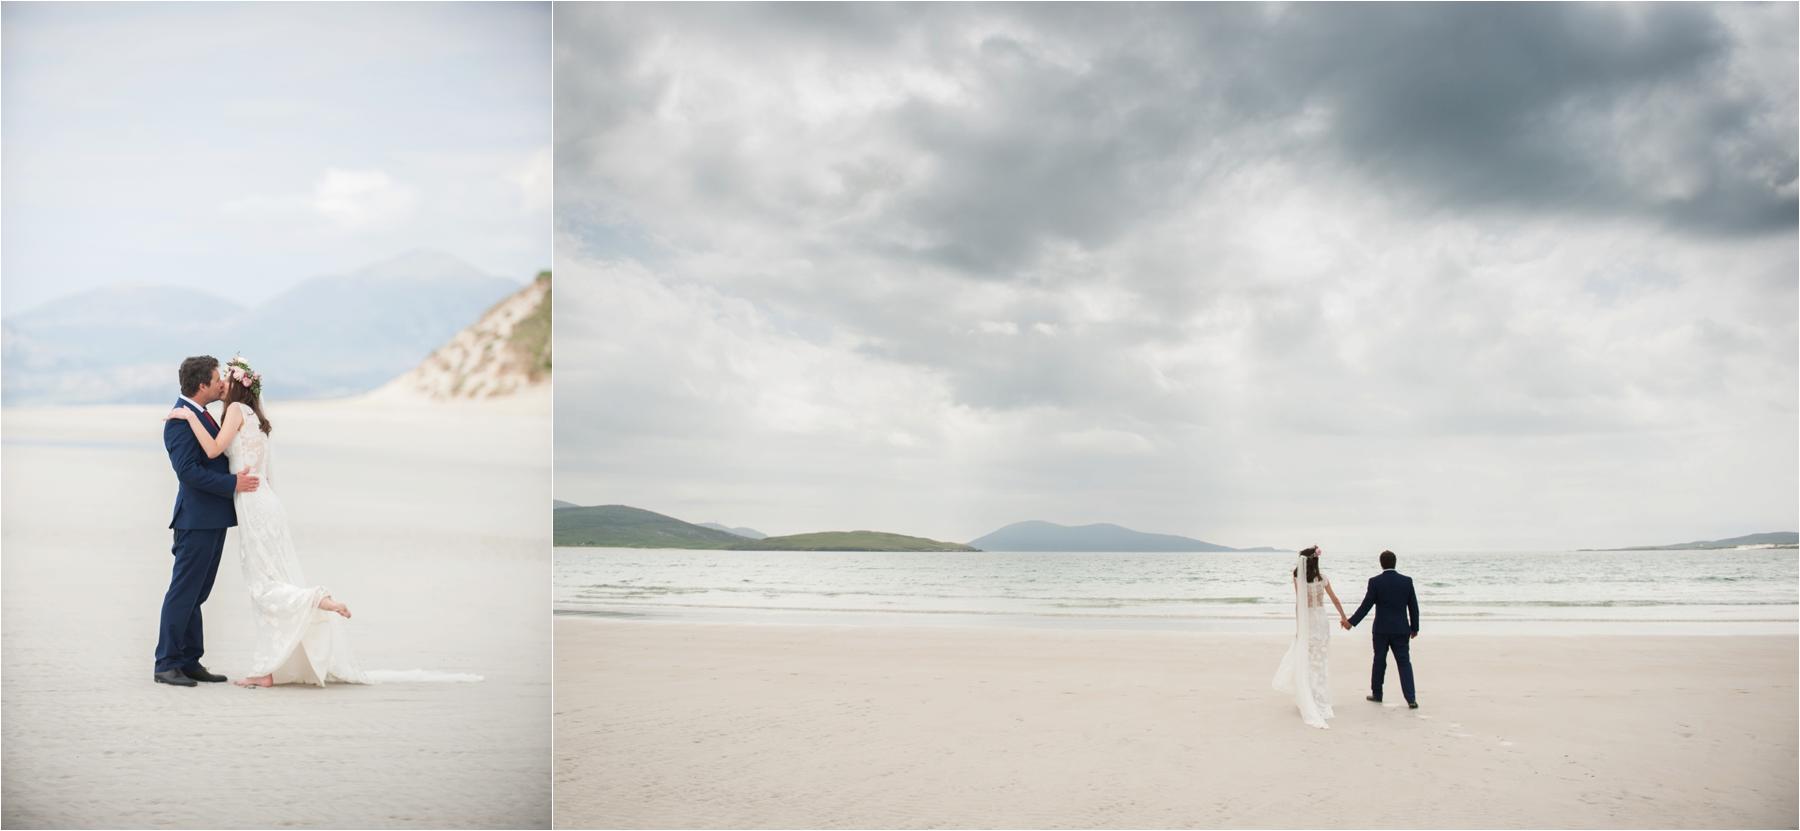 Bride Ilona is barefoot in her full-length white wedding gown as she and groom Emil walk along Luskentyre Beach after their elopement.